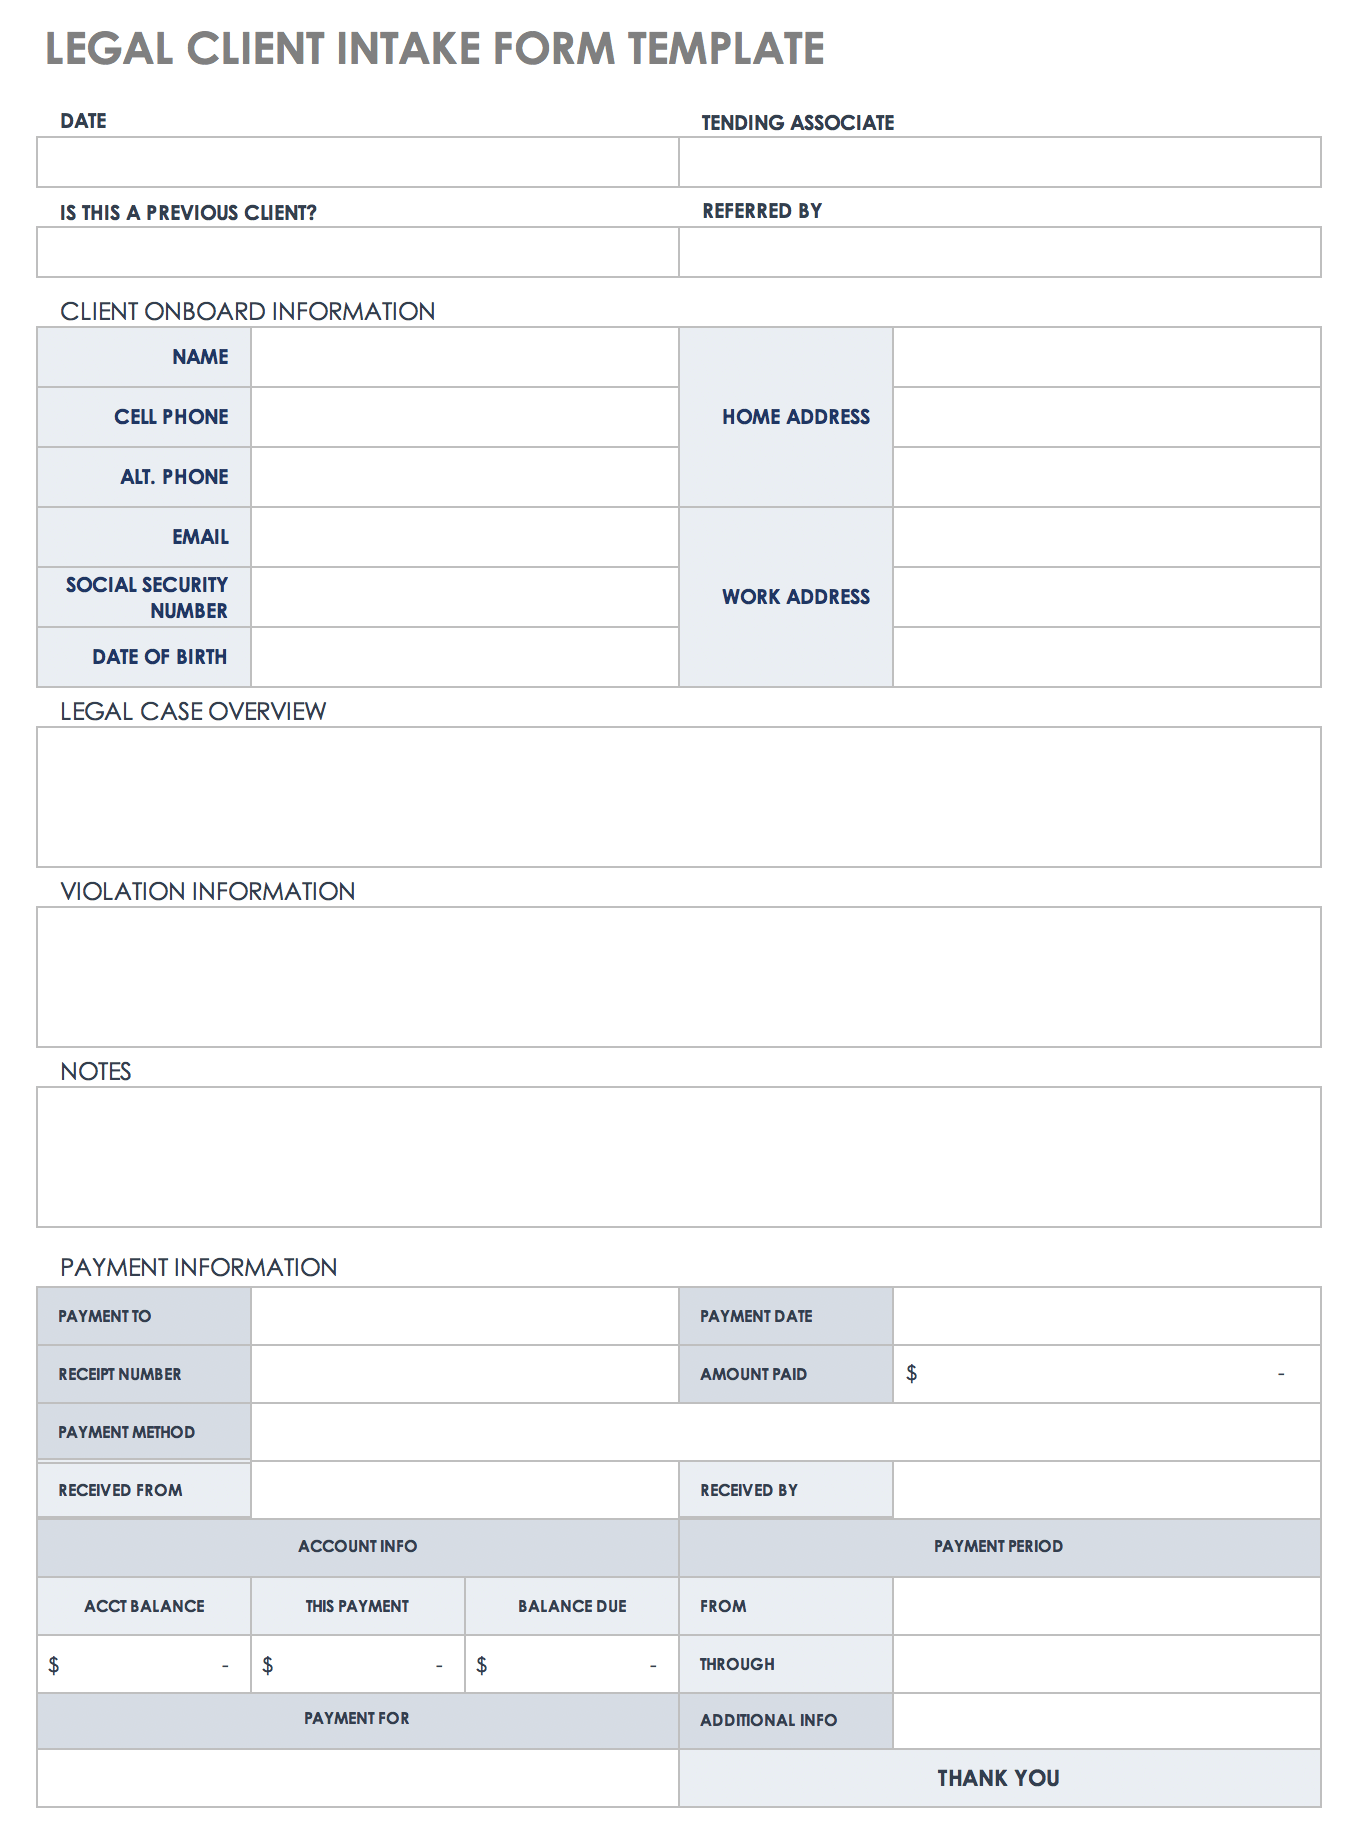 Client Intake Form Template Sample - Riset